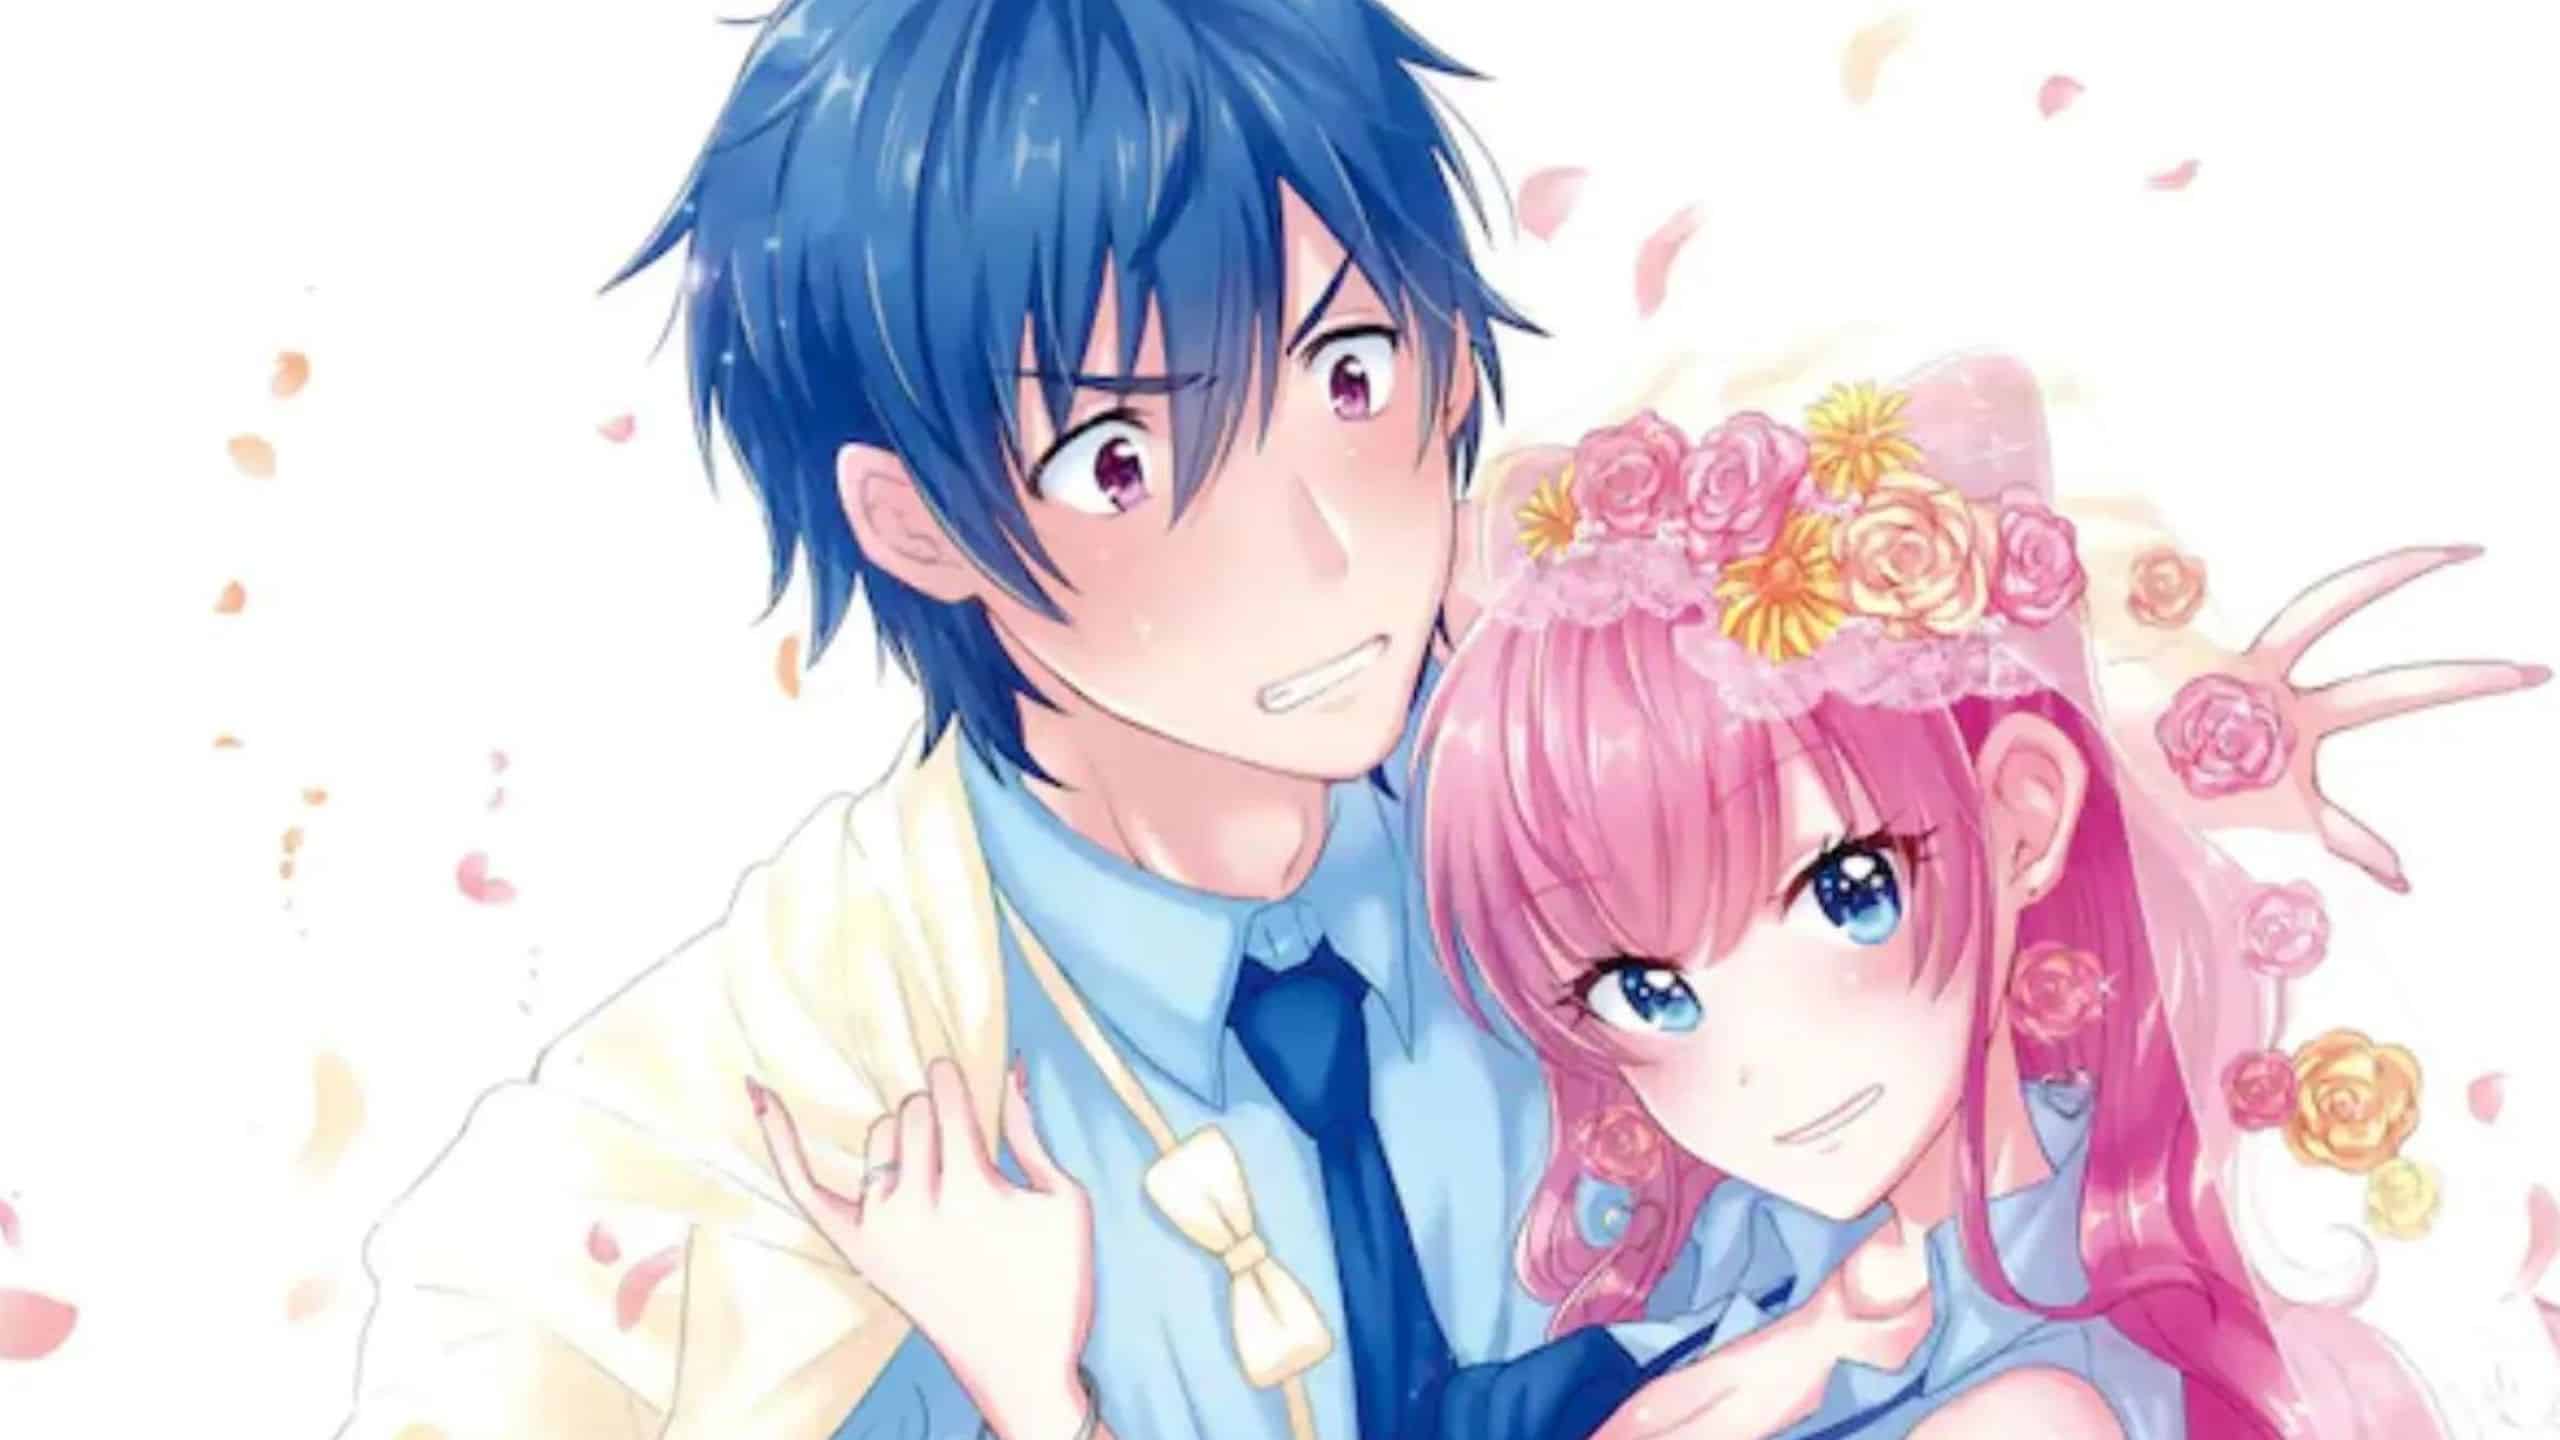 Fuufu Ijou Koibito Miman Chapter 66 Release Date : Spoilers, Streaming,  Recap, Schedule & Where To Watch? - SarkariResult